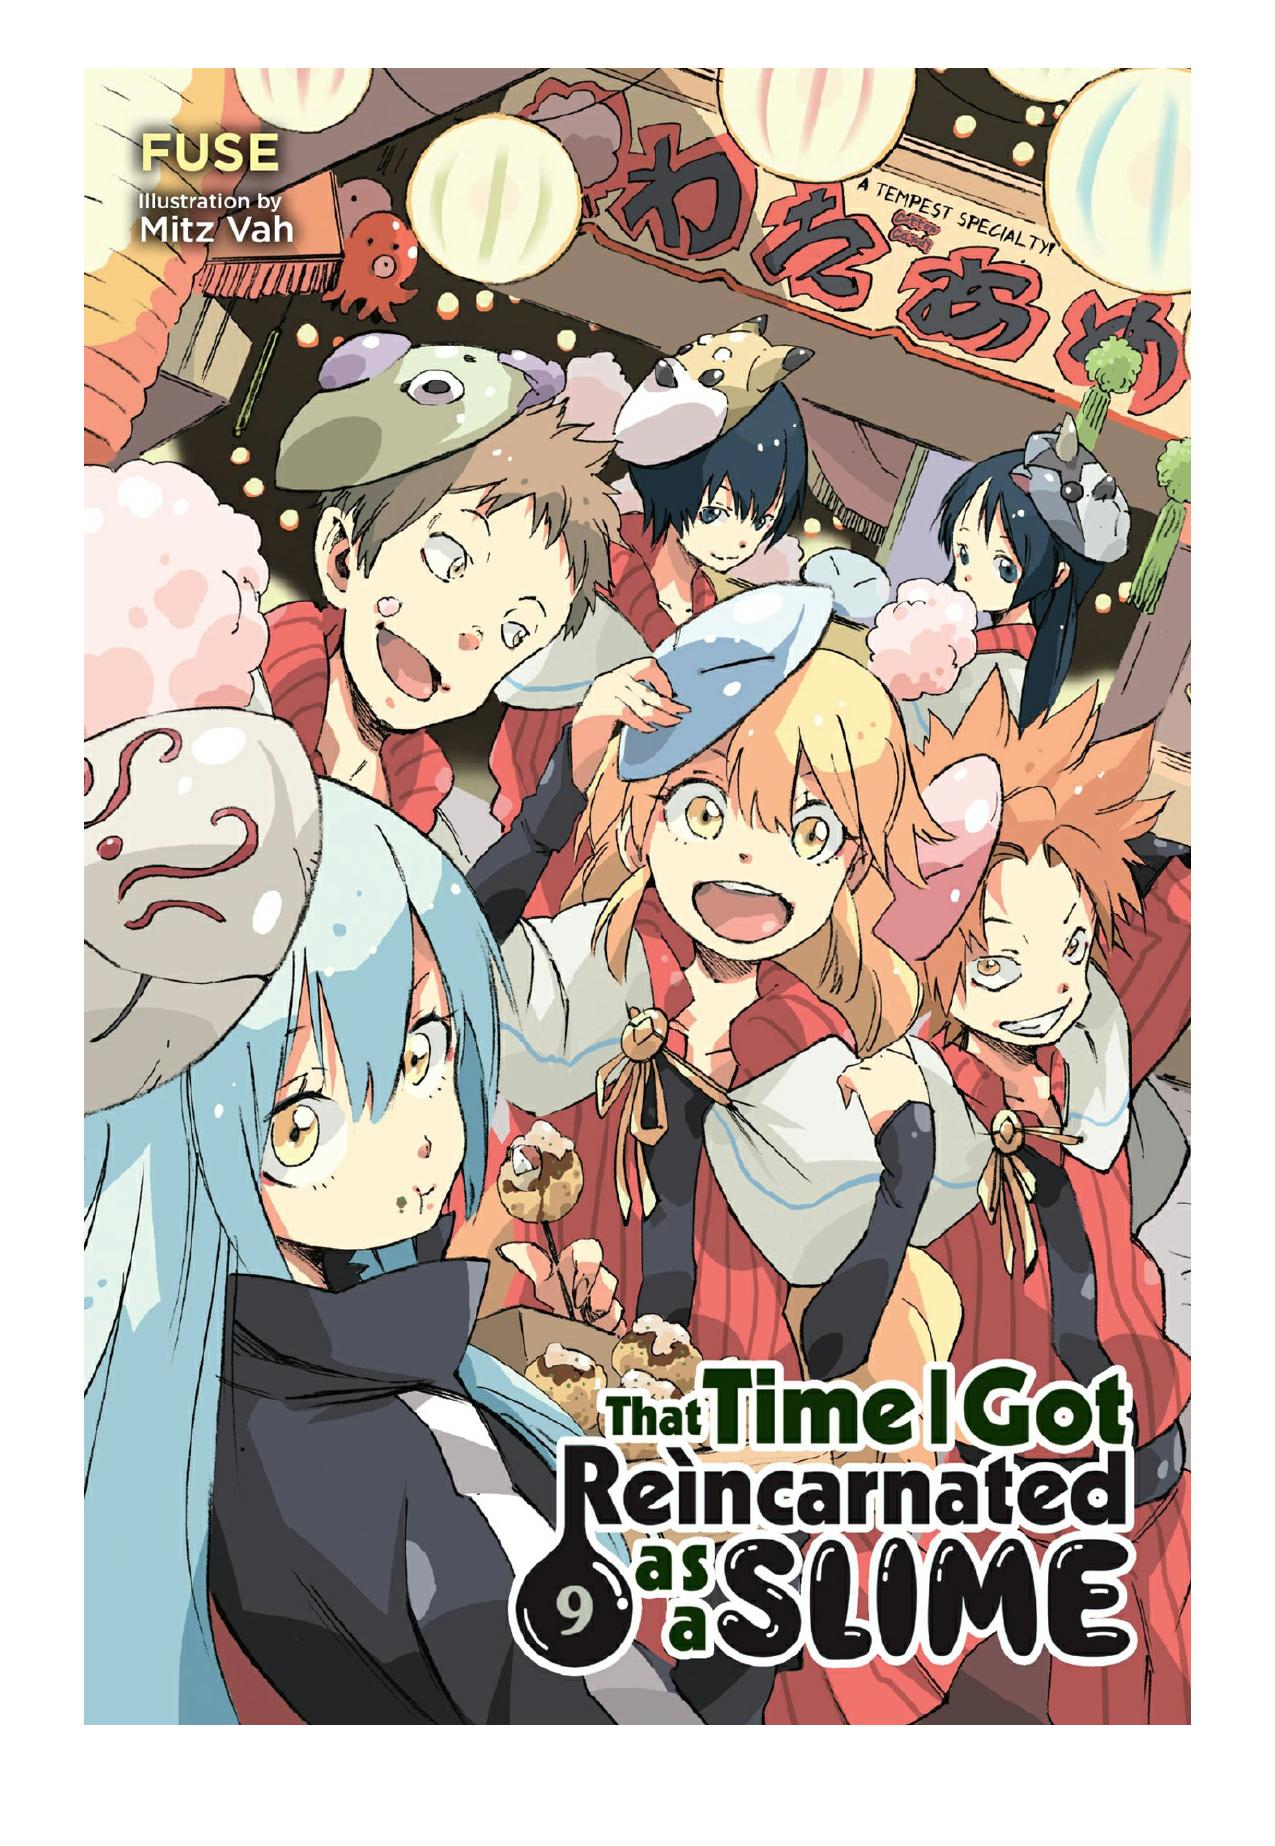 That Time I Got Reincarnated as a Slime, Vol. 9 by Fuse & Mitz Vah